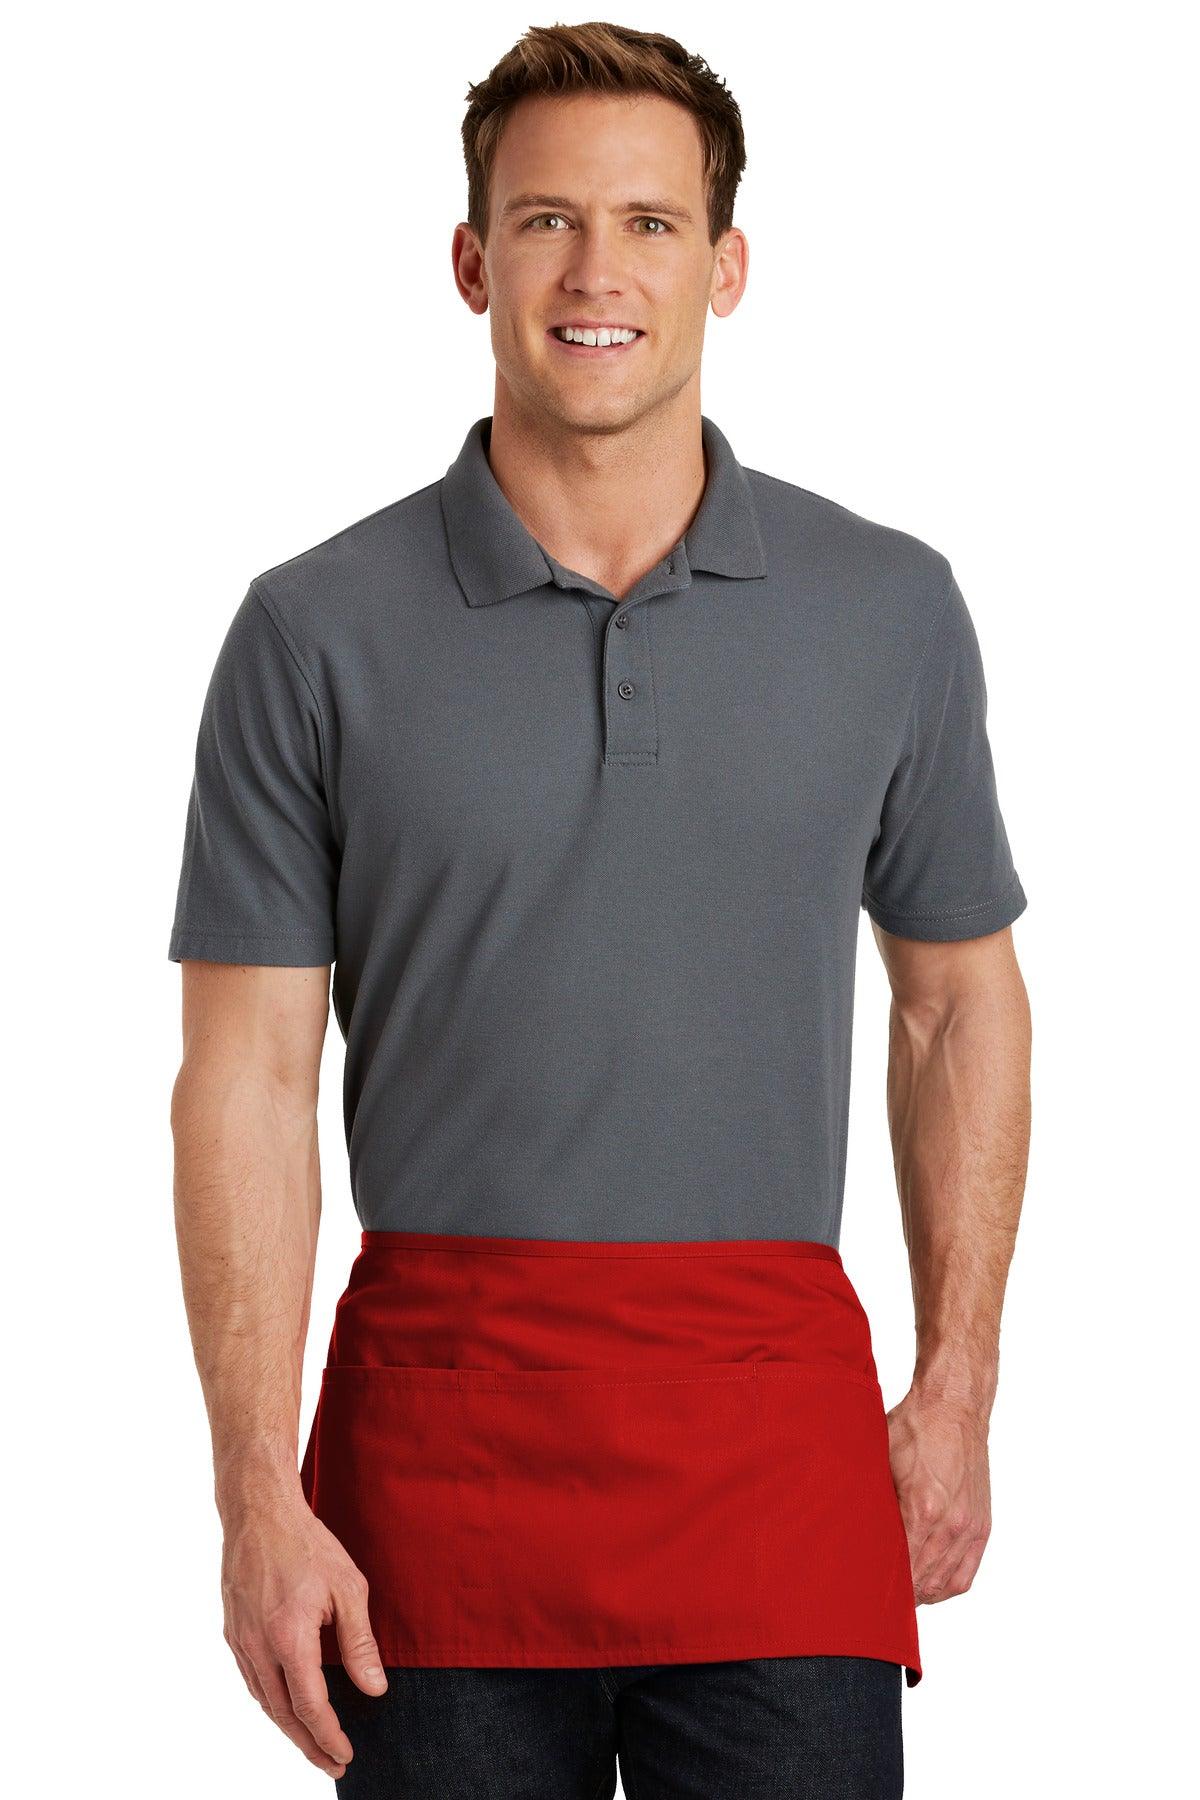 Port Authority Waist Apron with Pockets. A515 - Dresses Max